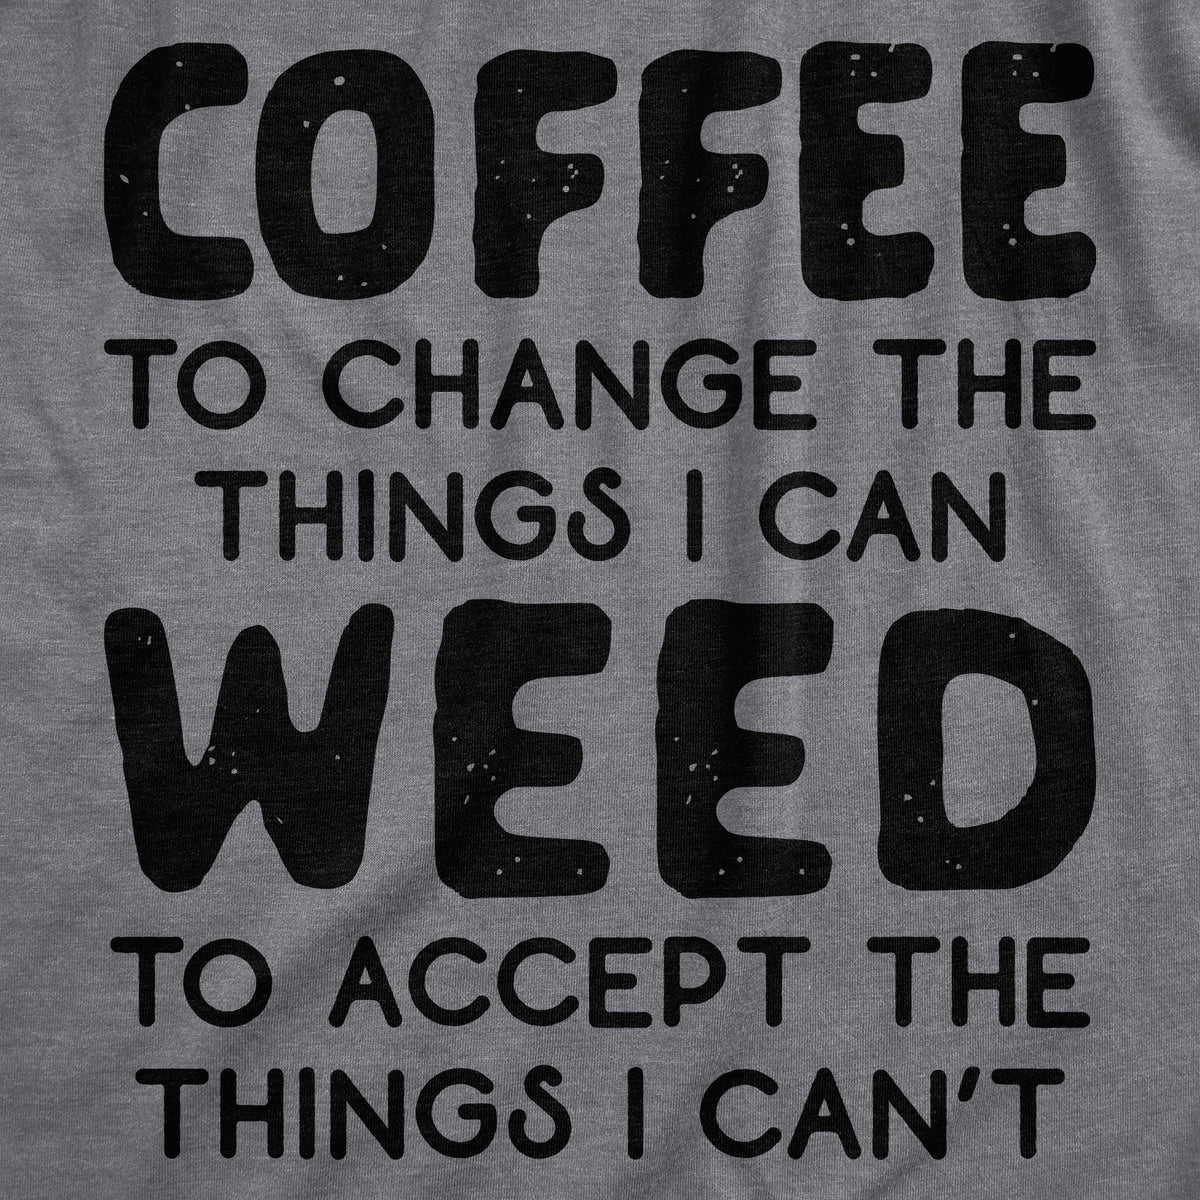 Coffee To Change The Things I Can Weed To Accept The Things I Can&#39;t Men&#39;s T Shirt